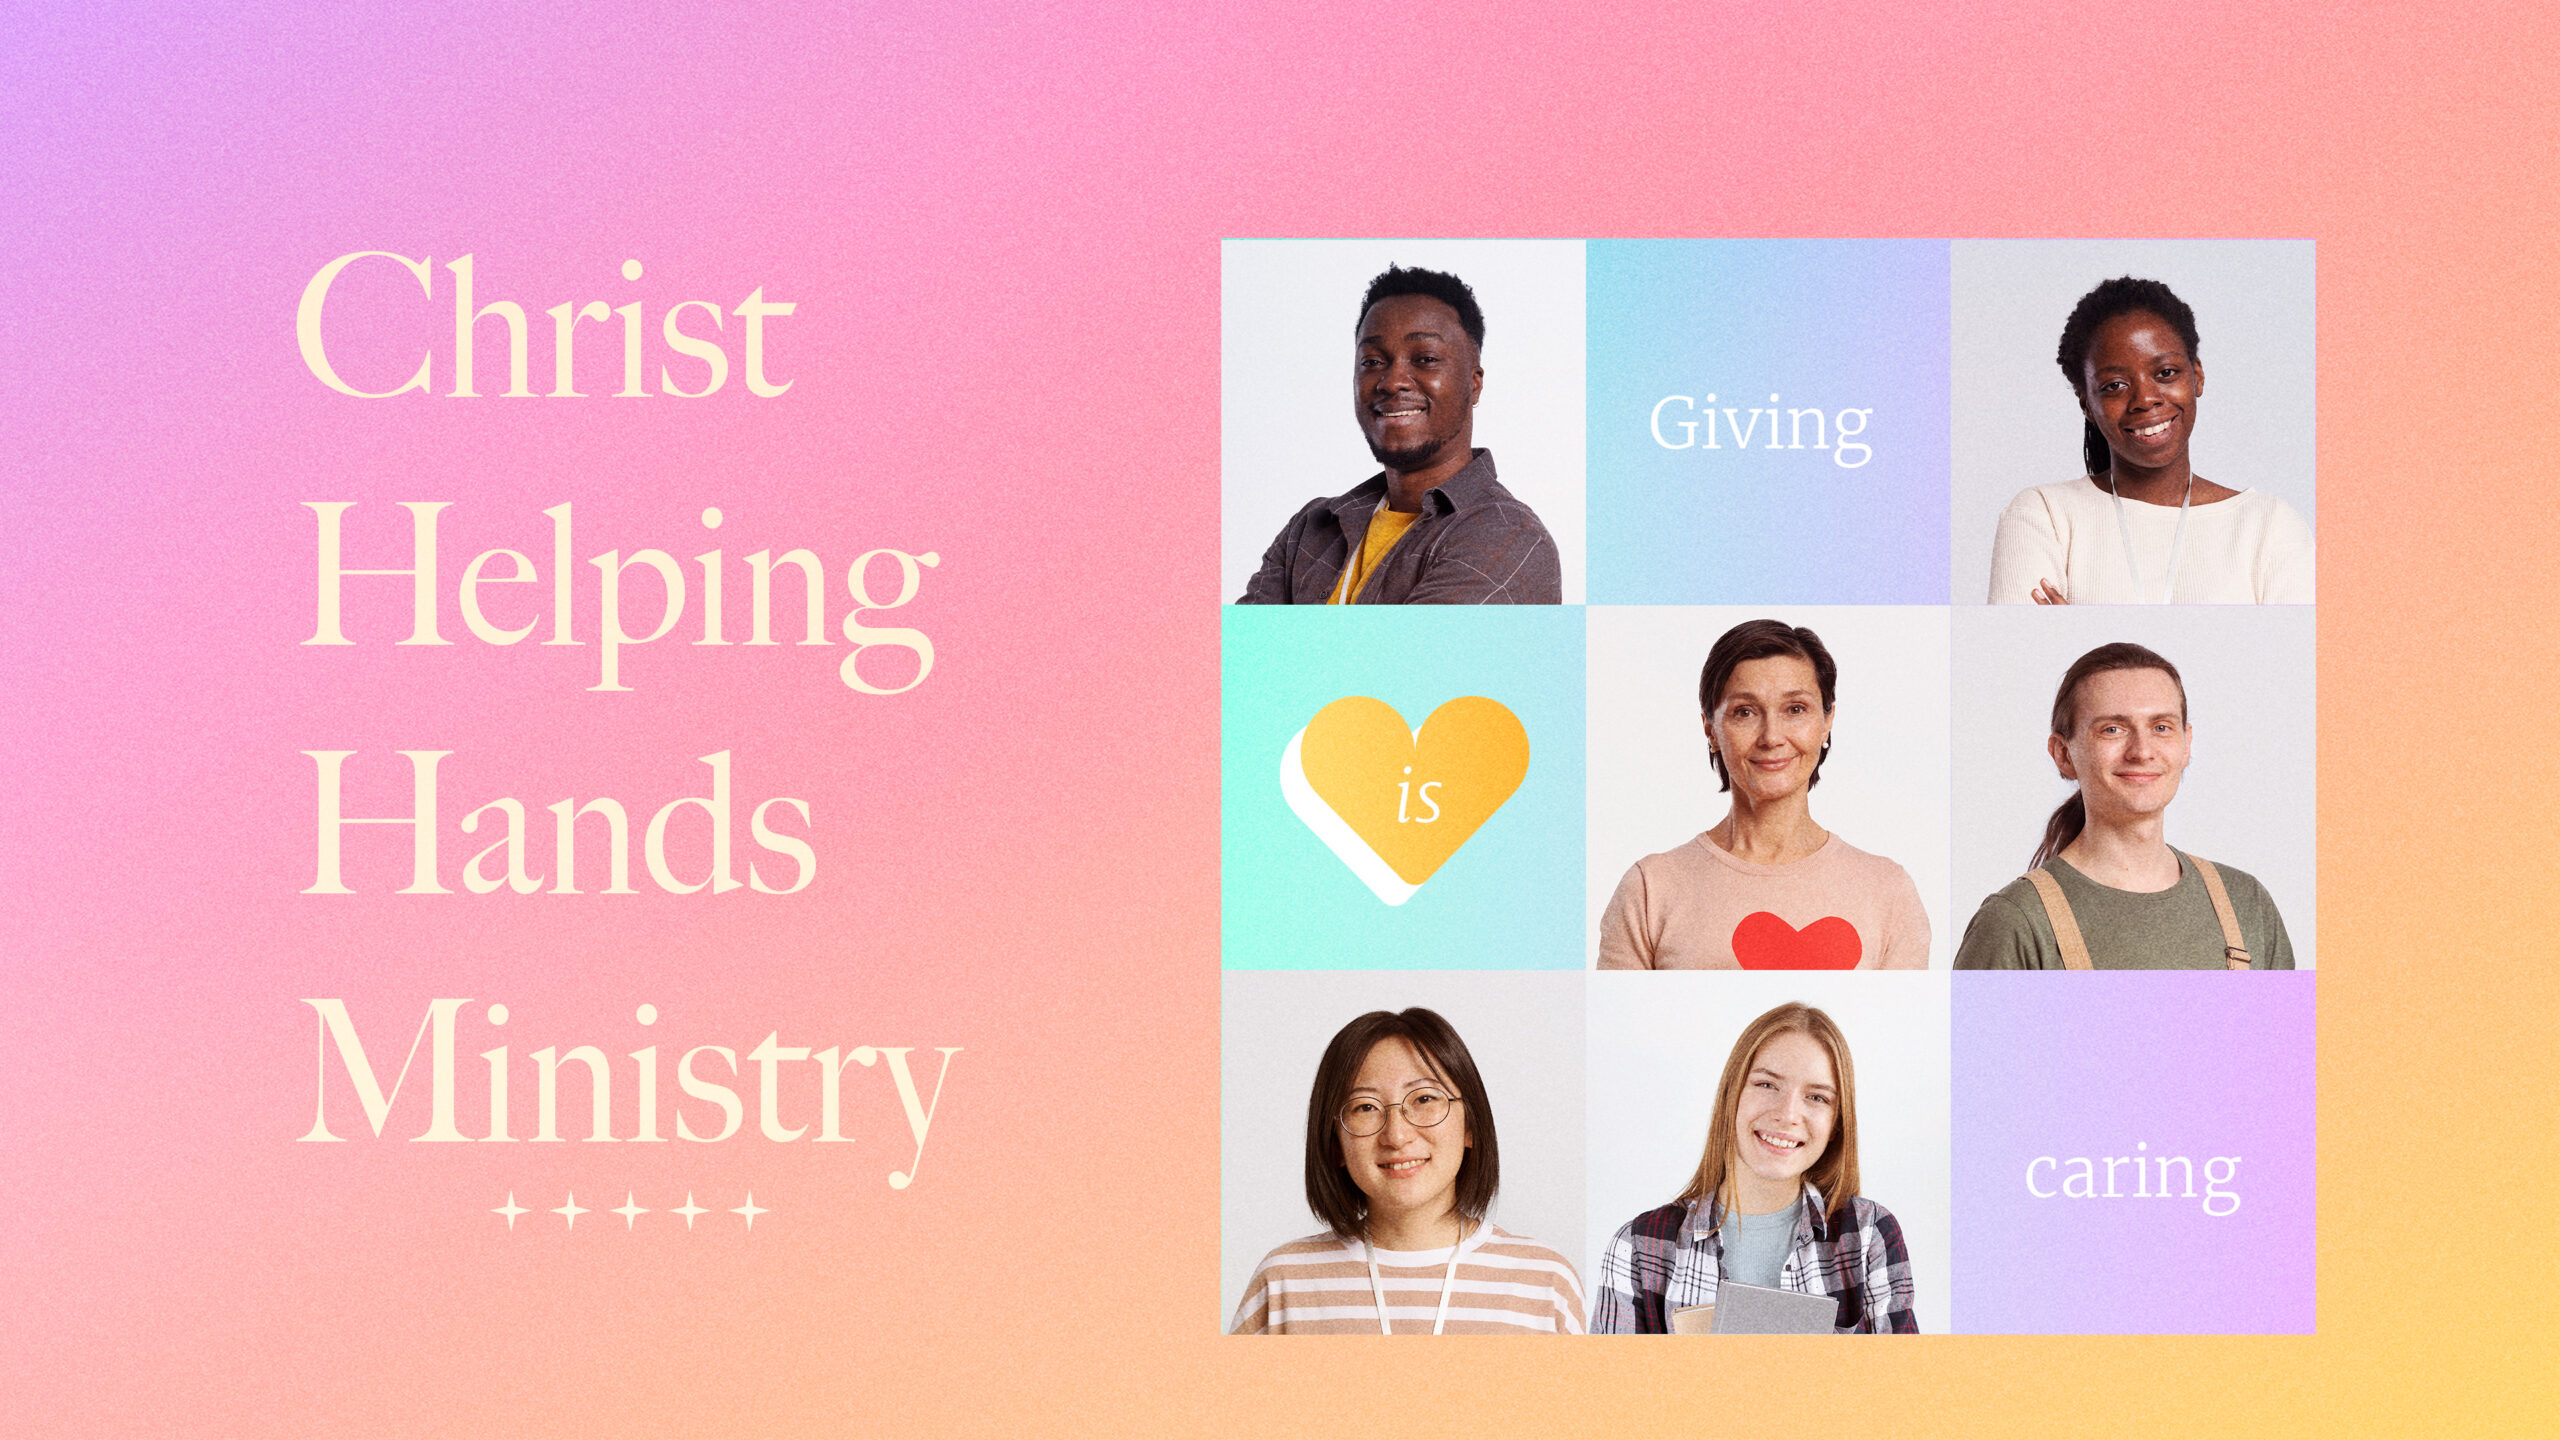 Helping Hands Ministry